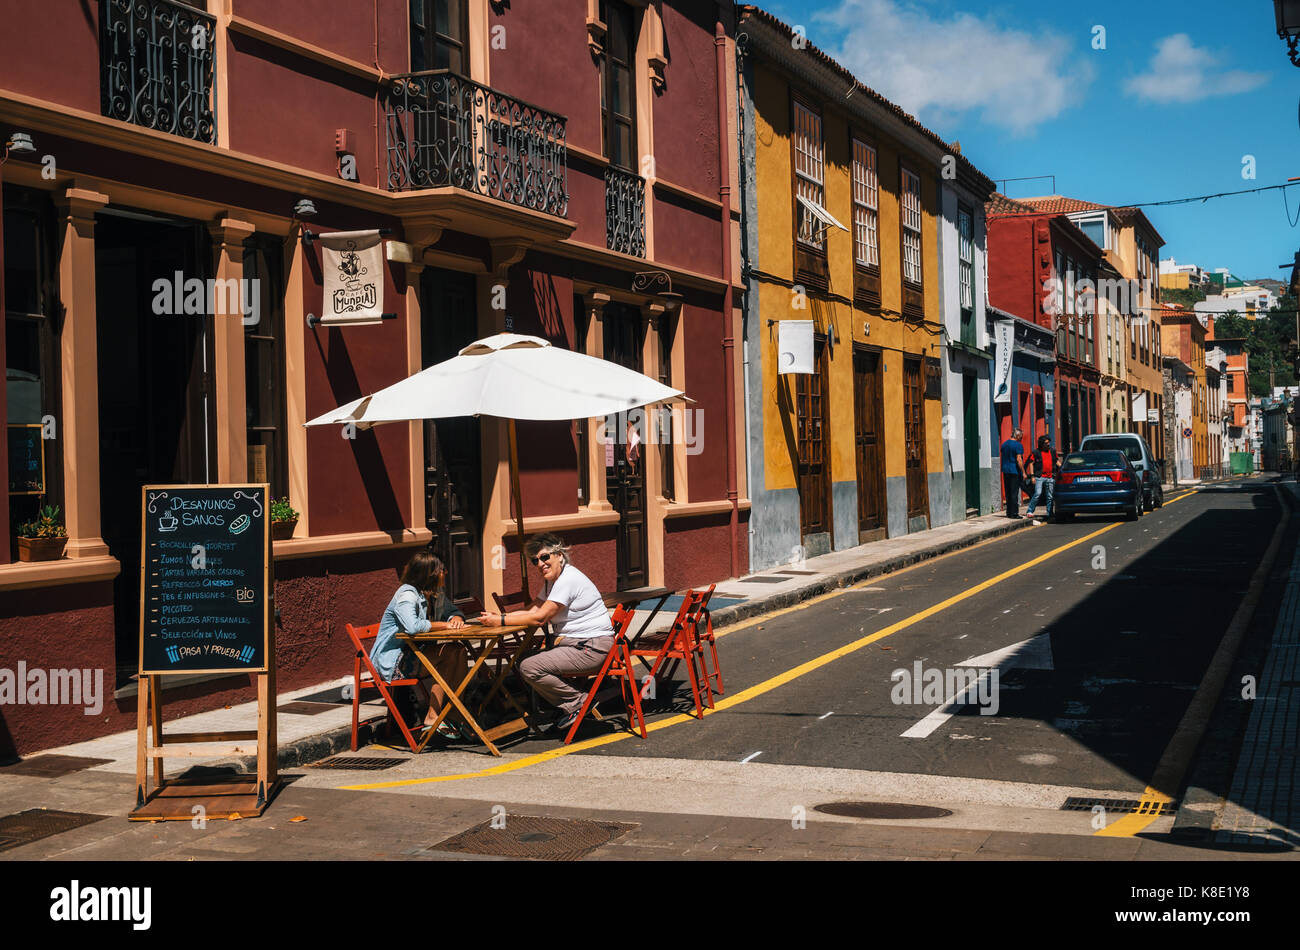 La Laguna, Tenerife, Canary islands, Spain - May 23, 2017. People relax and enjoy their drinks and food at outdoor cafe terrace on colorful street of  Stock Photo